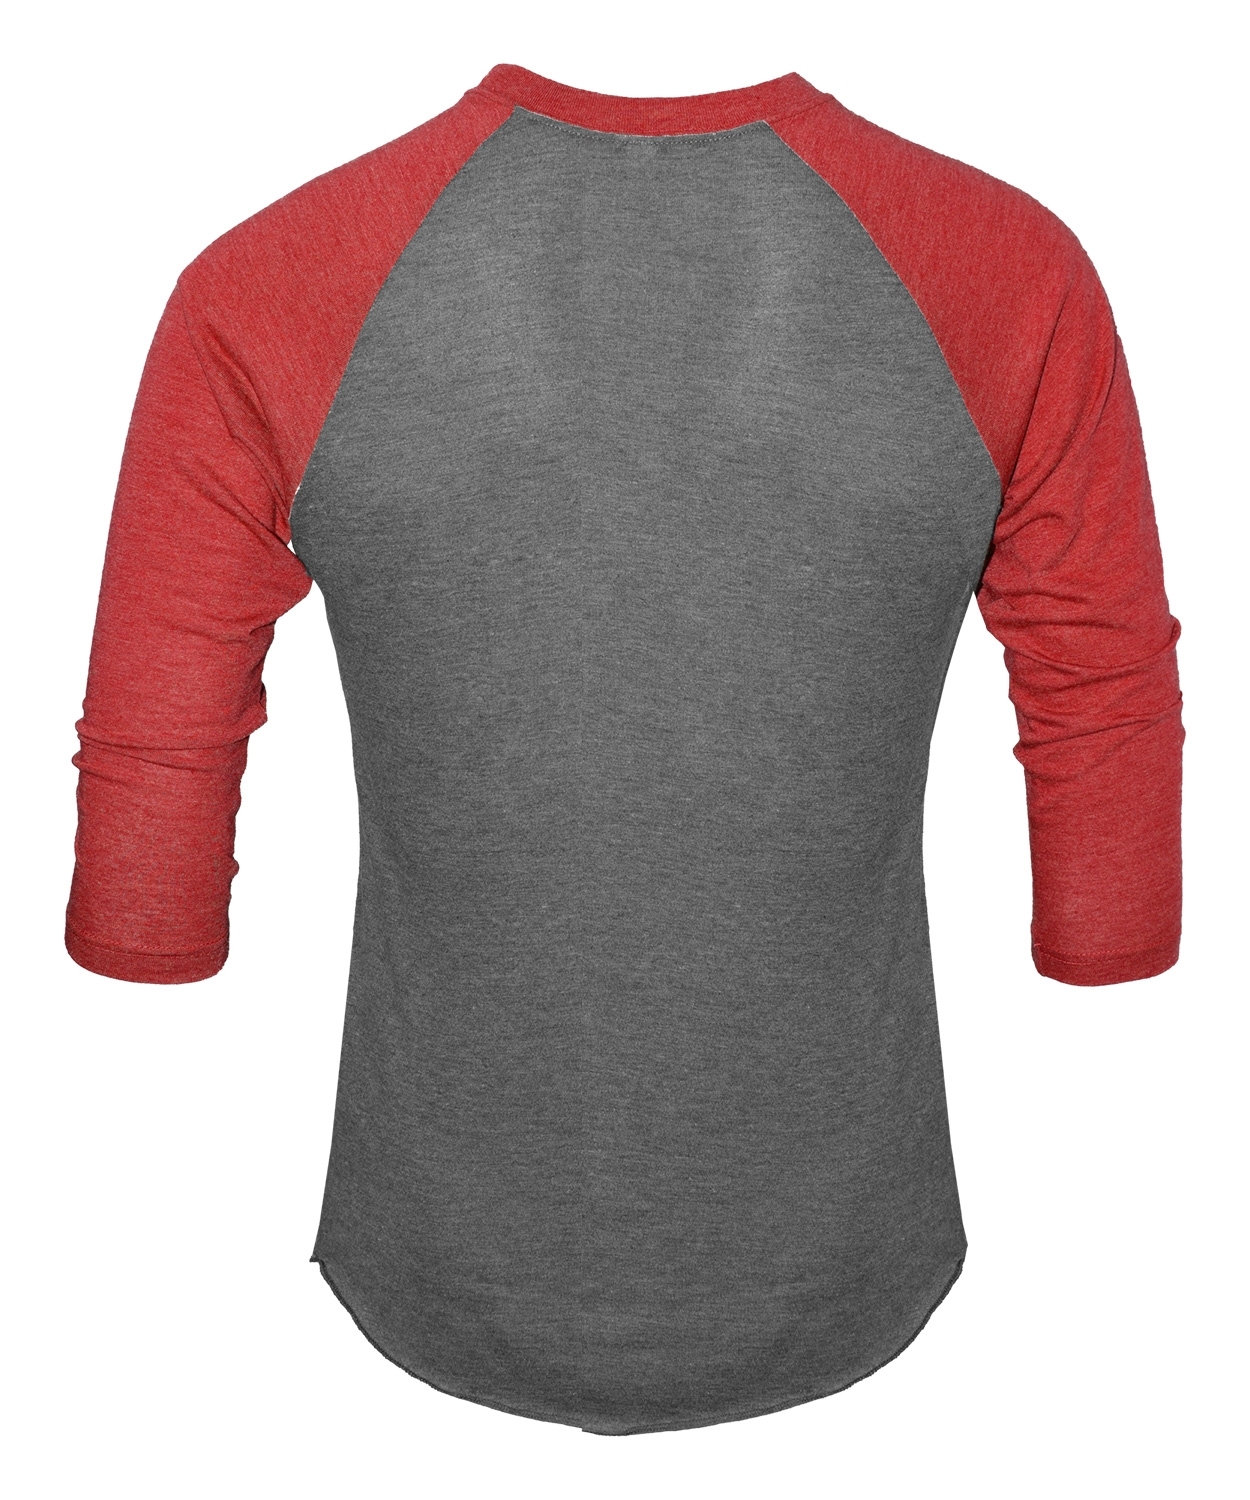 click to view SPORTS GREY/RED